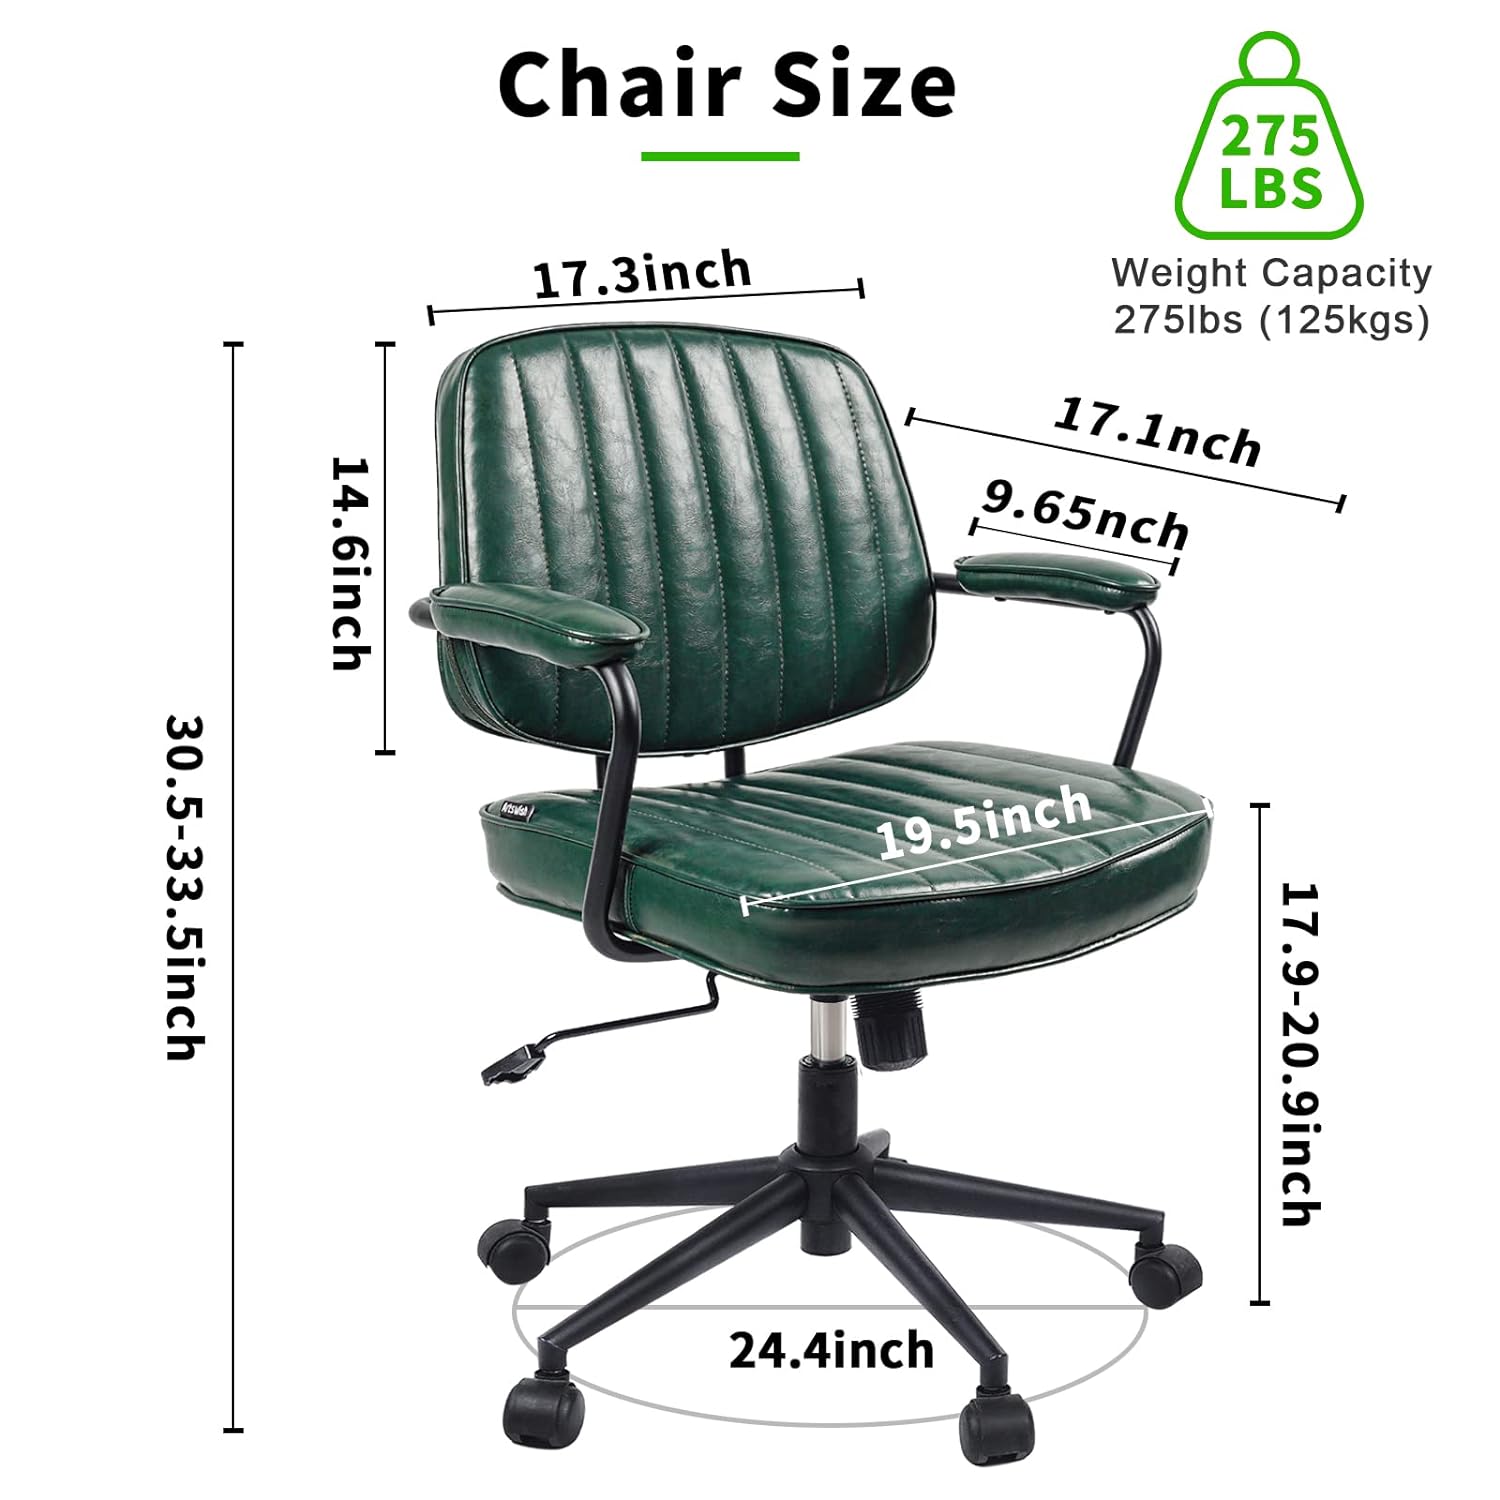 TKM Home Artswish Mid Century Office Chair Leather Desk Chair Green Office Desk Chair Home Office Chair With Wheels And Arms